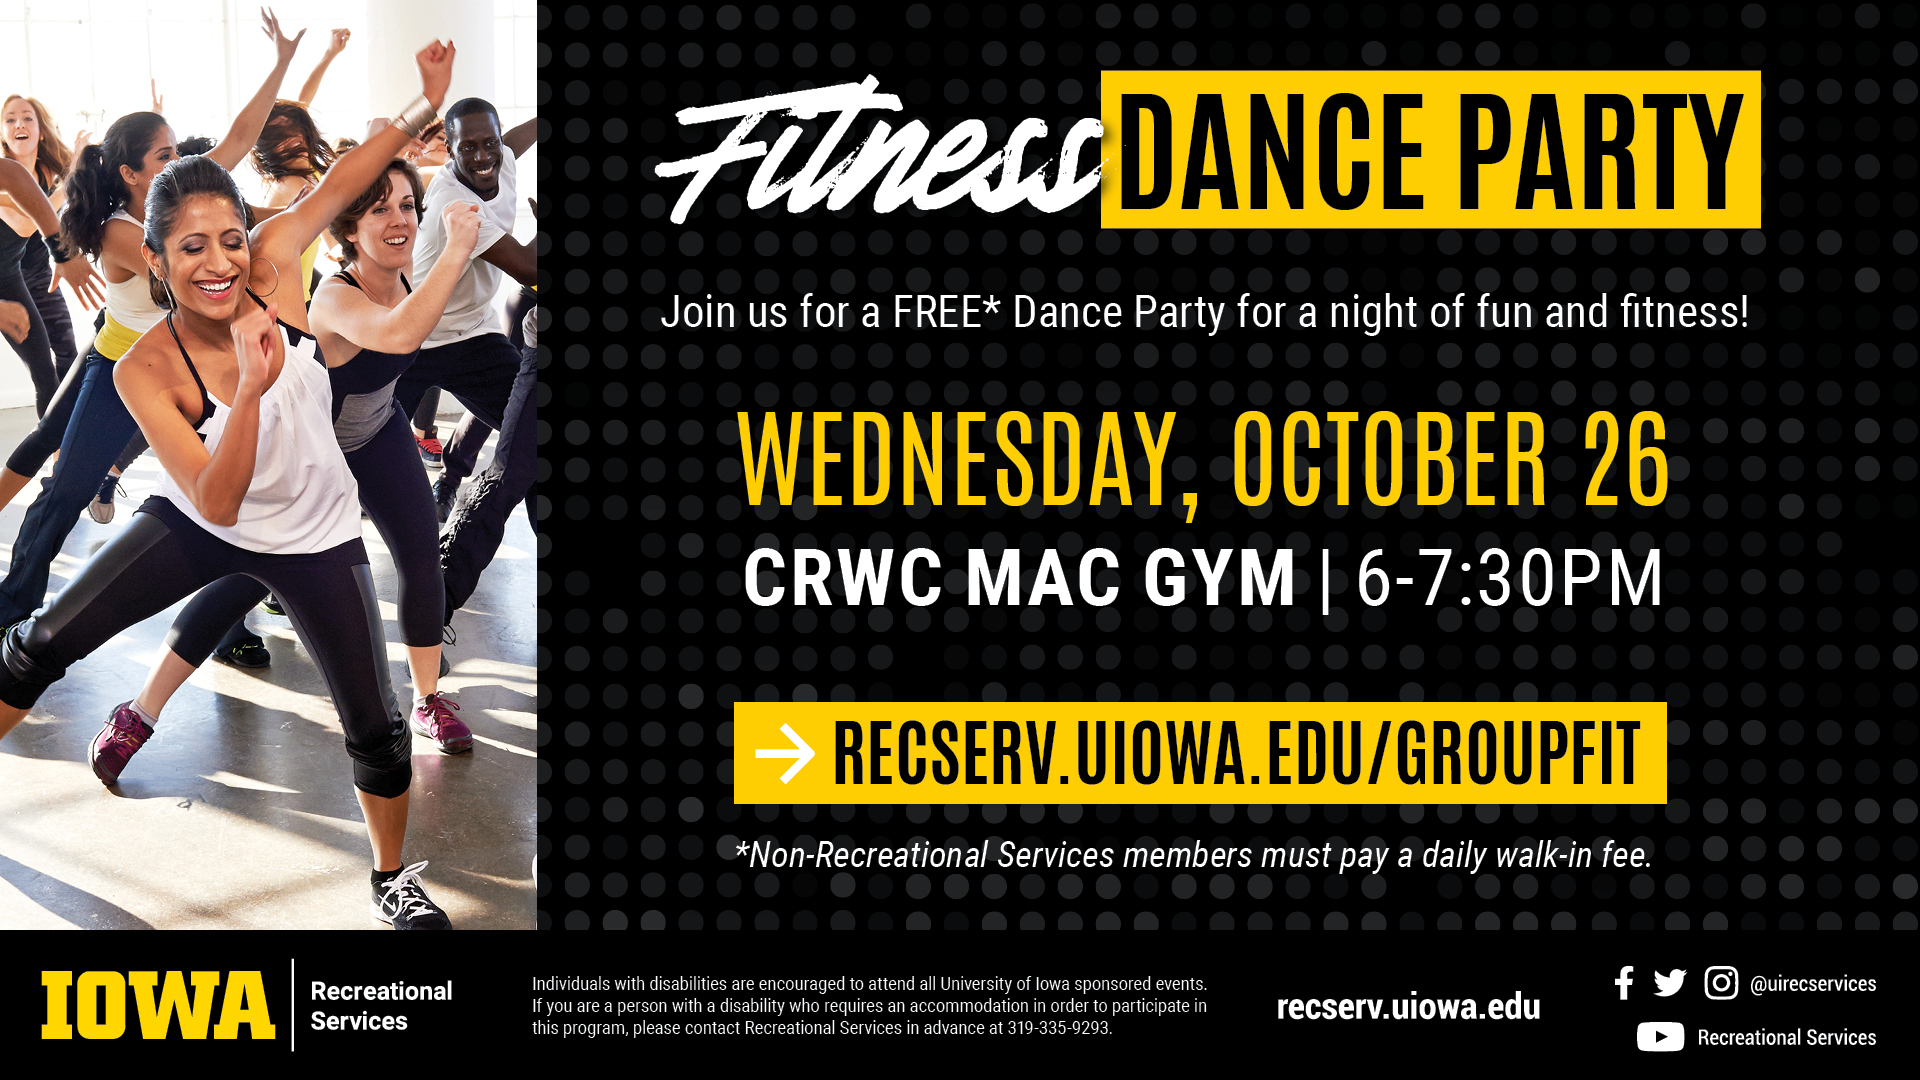 Fitness Dance Party on Wednesday, October 26! learn more at recserv.uiowa.edu/groupfit